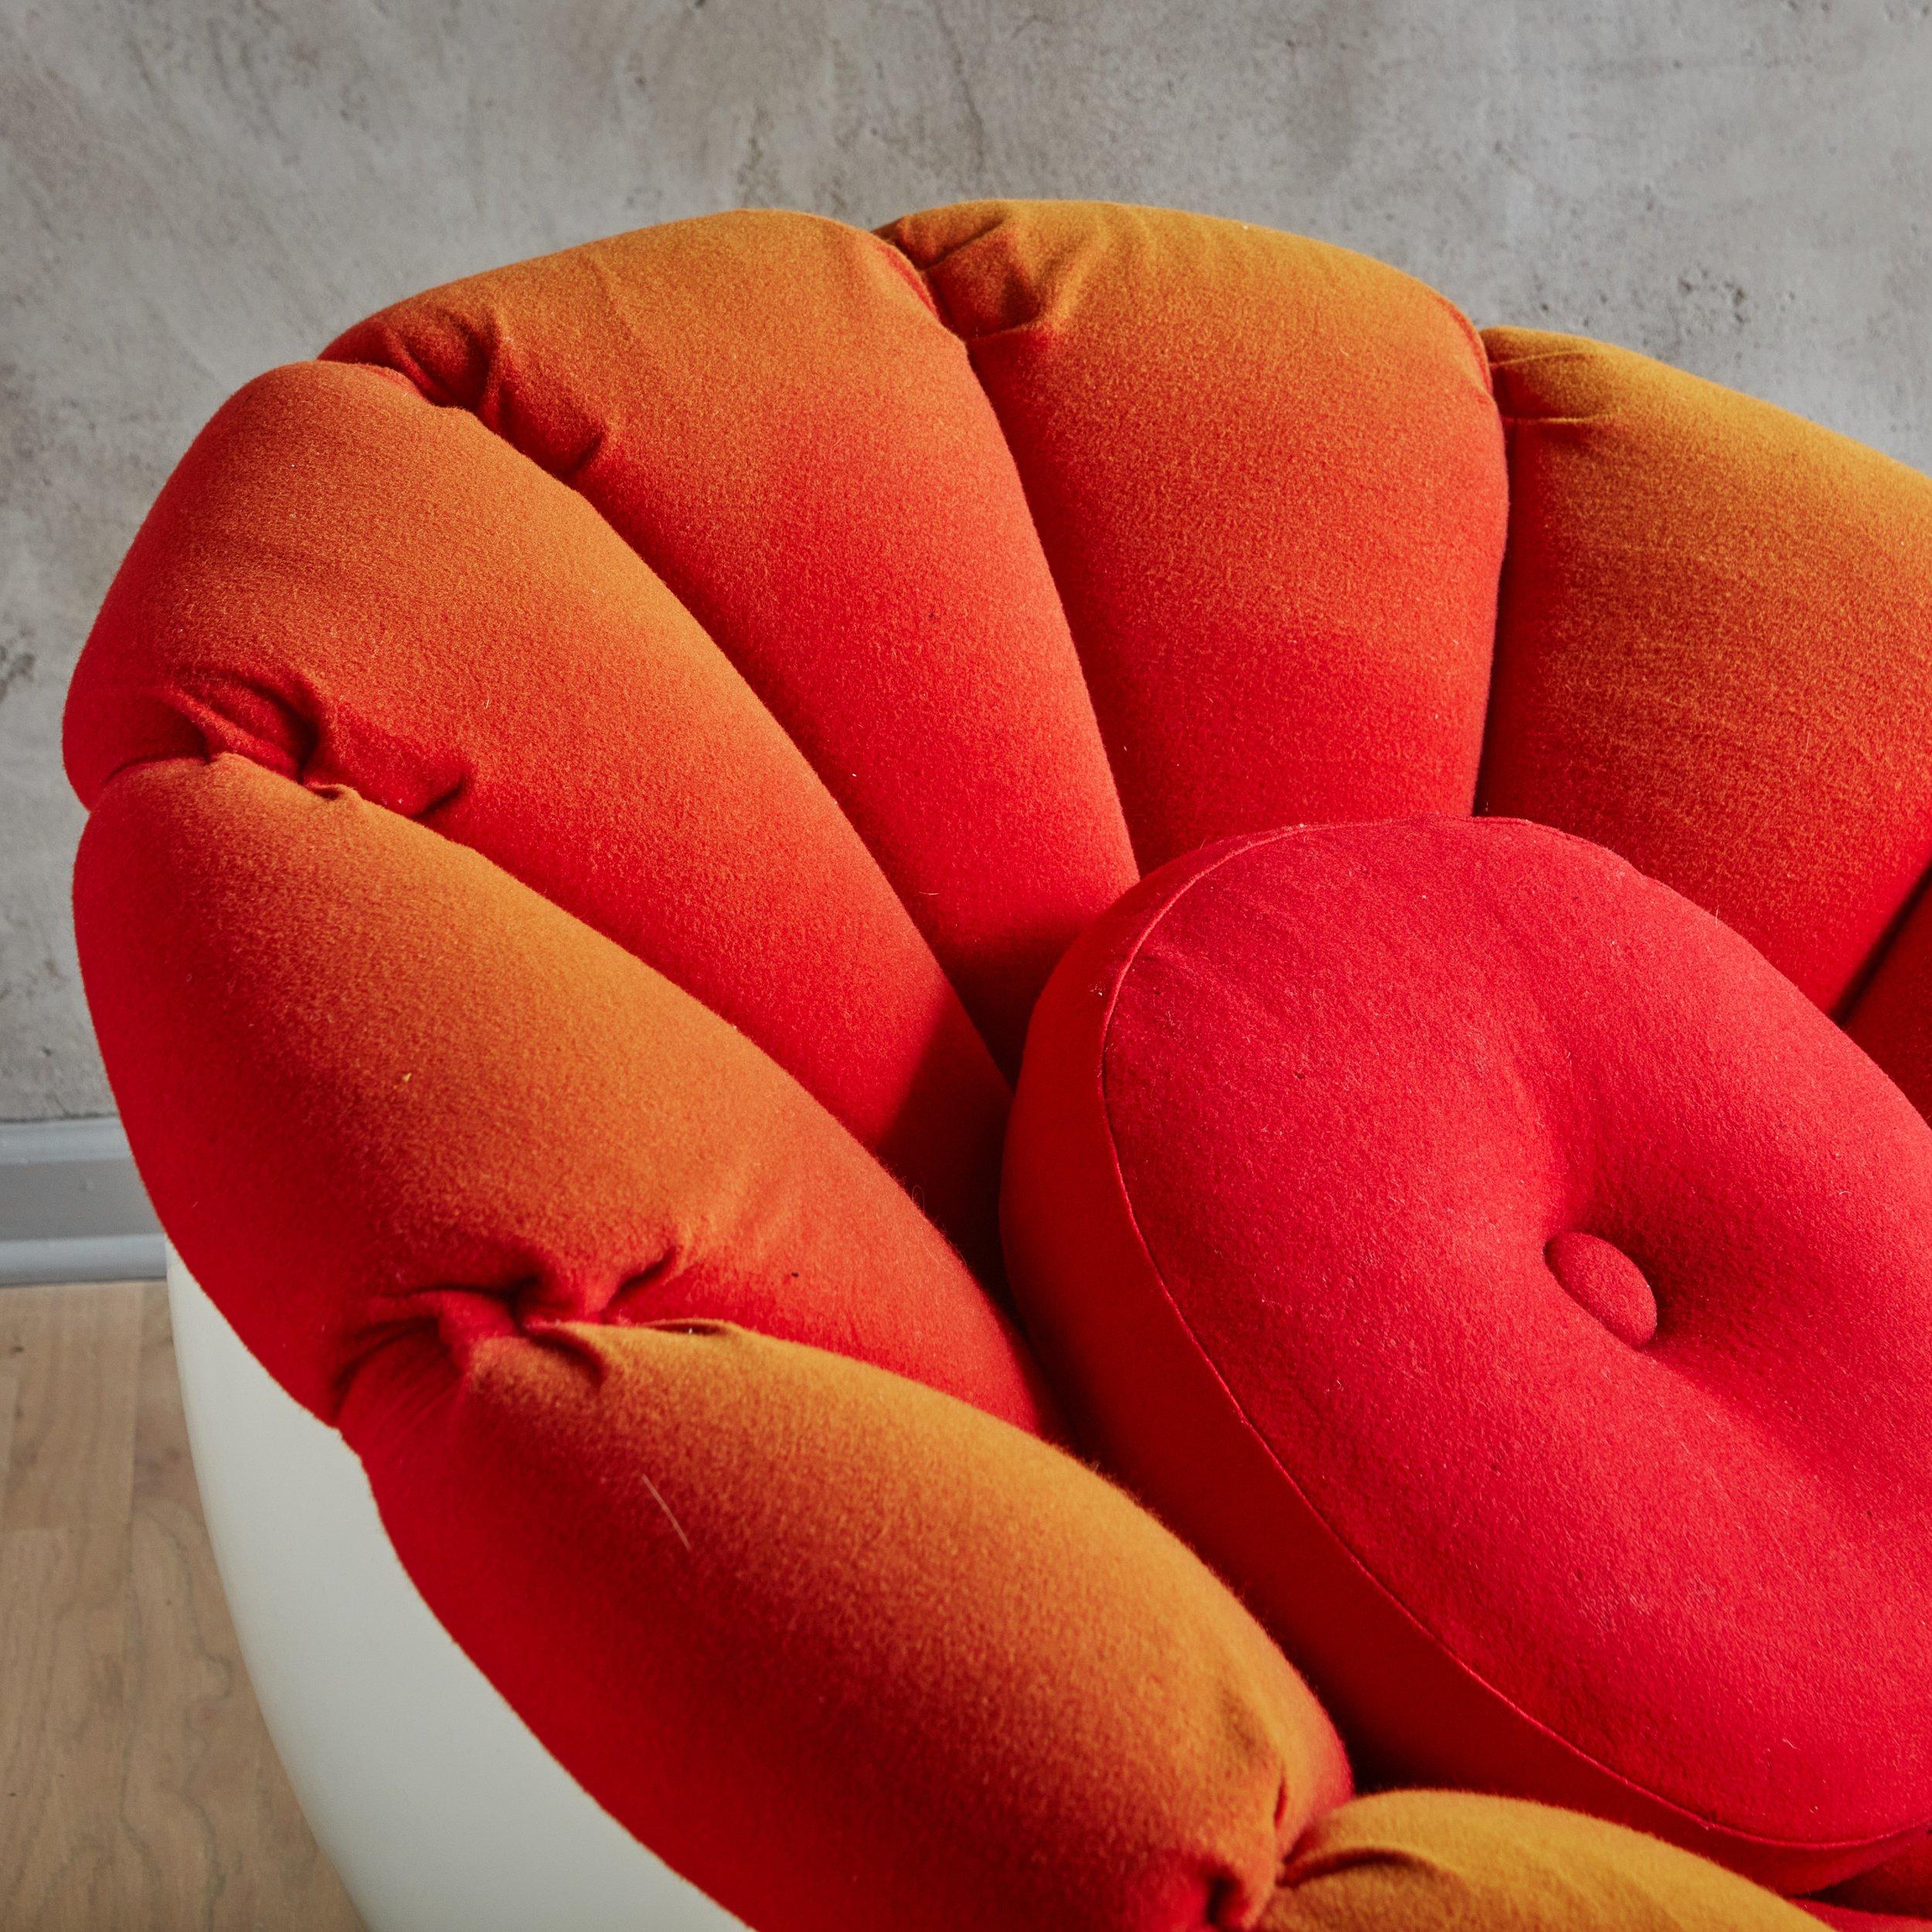 Fiberglass ‘Girasole’ Chair with Pillow by Luciano Frigerio, Italy 1960s For Sale 1